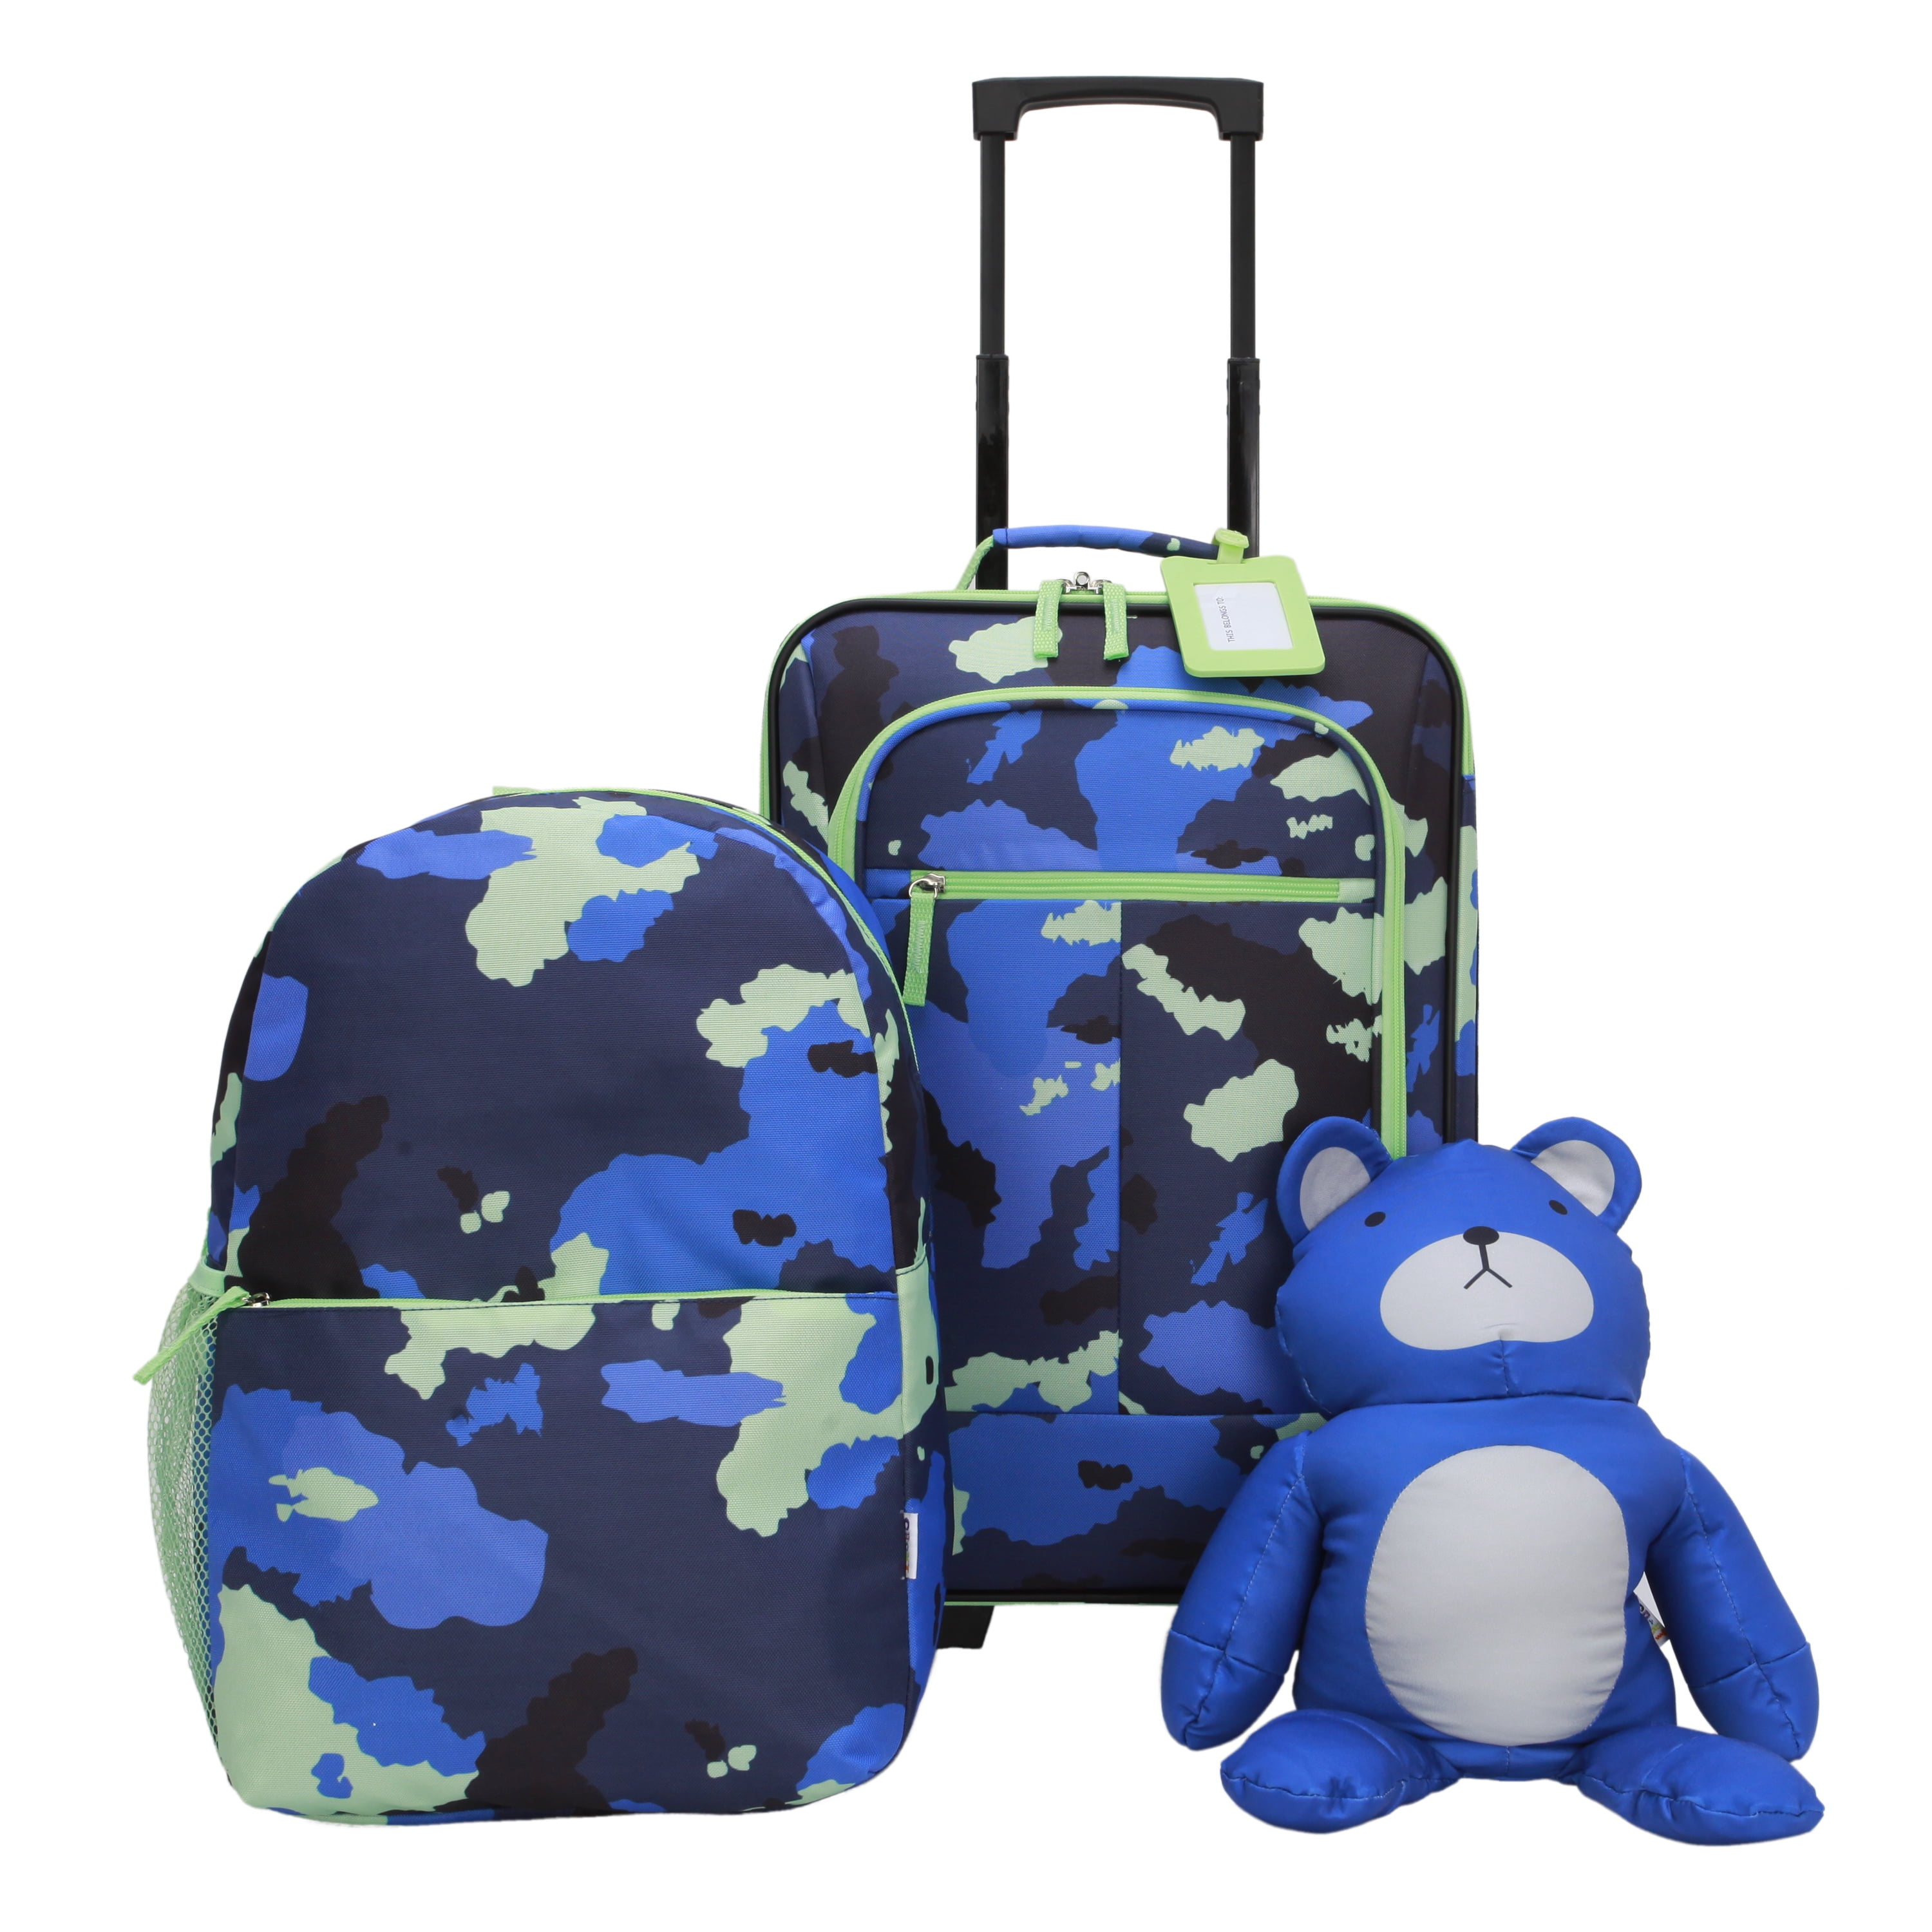 Crckt 4 Piece 18-inch Soft Side Carry-On Kids Luggage Set, Blue Camo, Size: 18in UR: 18''H x 12.5 WX 6.5''Large BACKPACK:15.5IN H x 11in W x 6in L